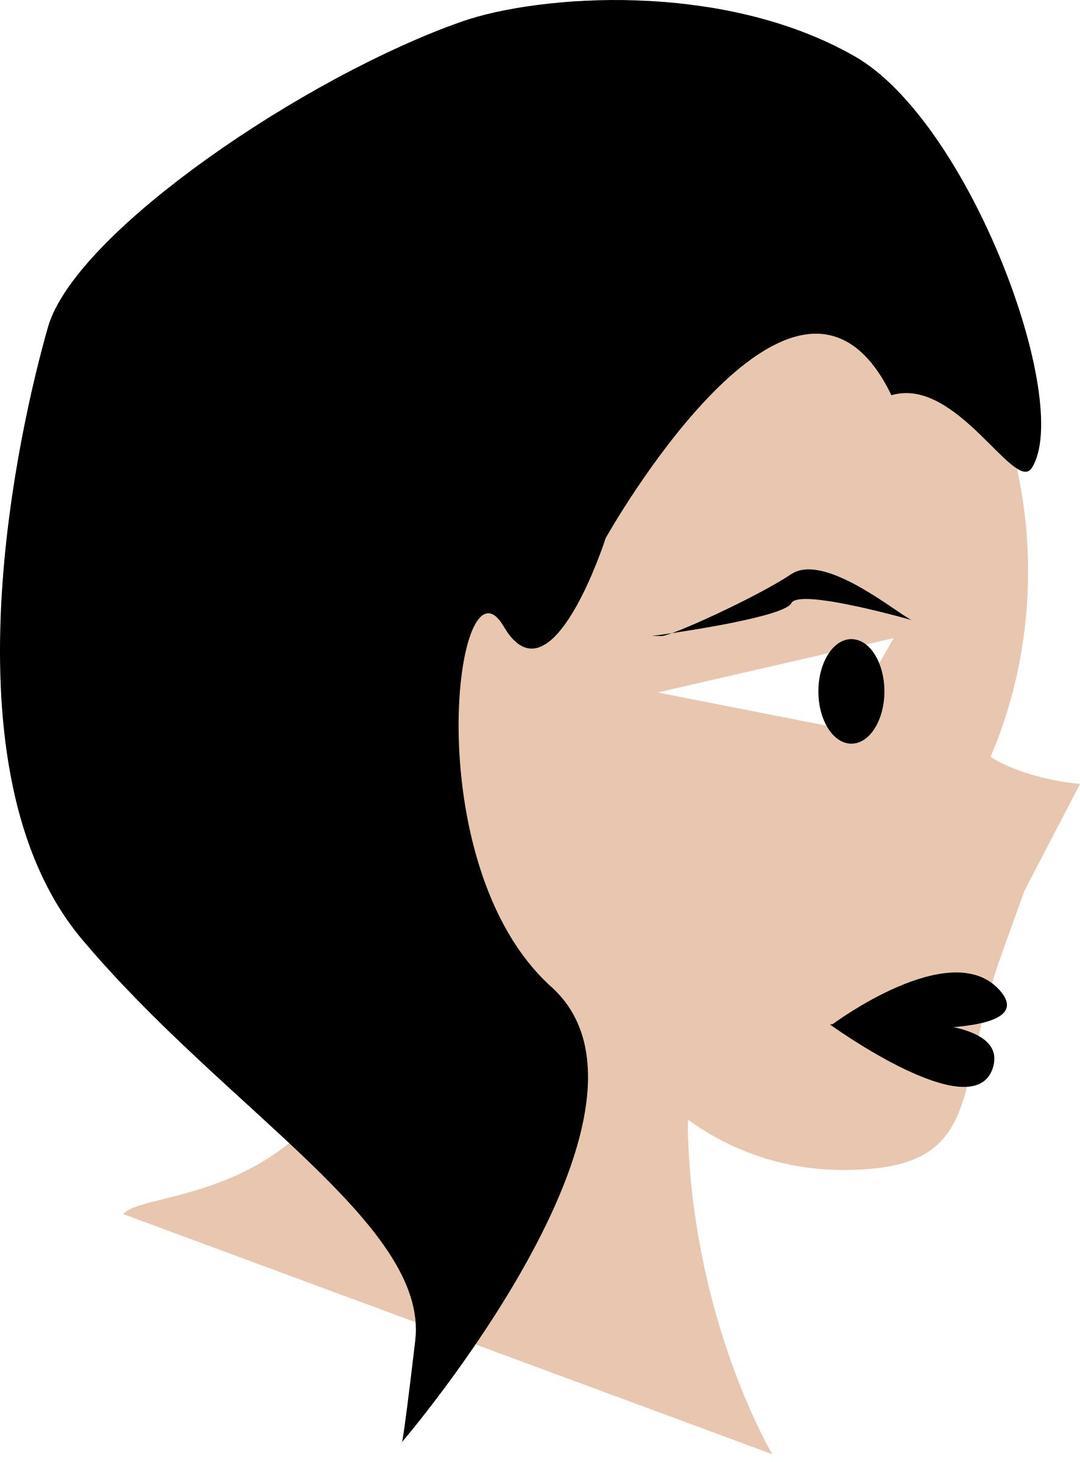 Female Head-Younger png transparent